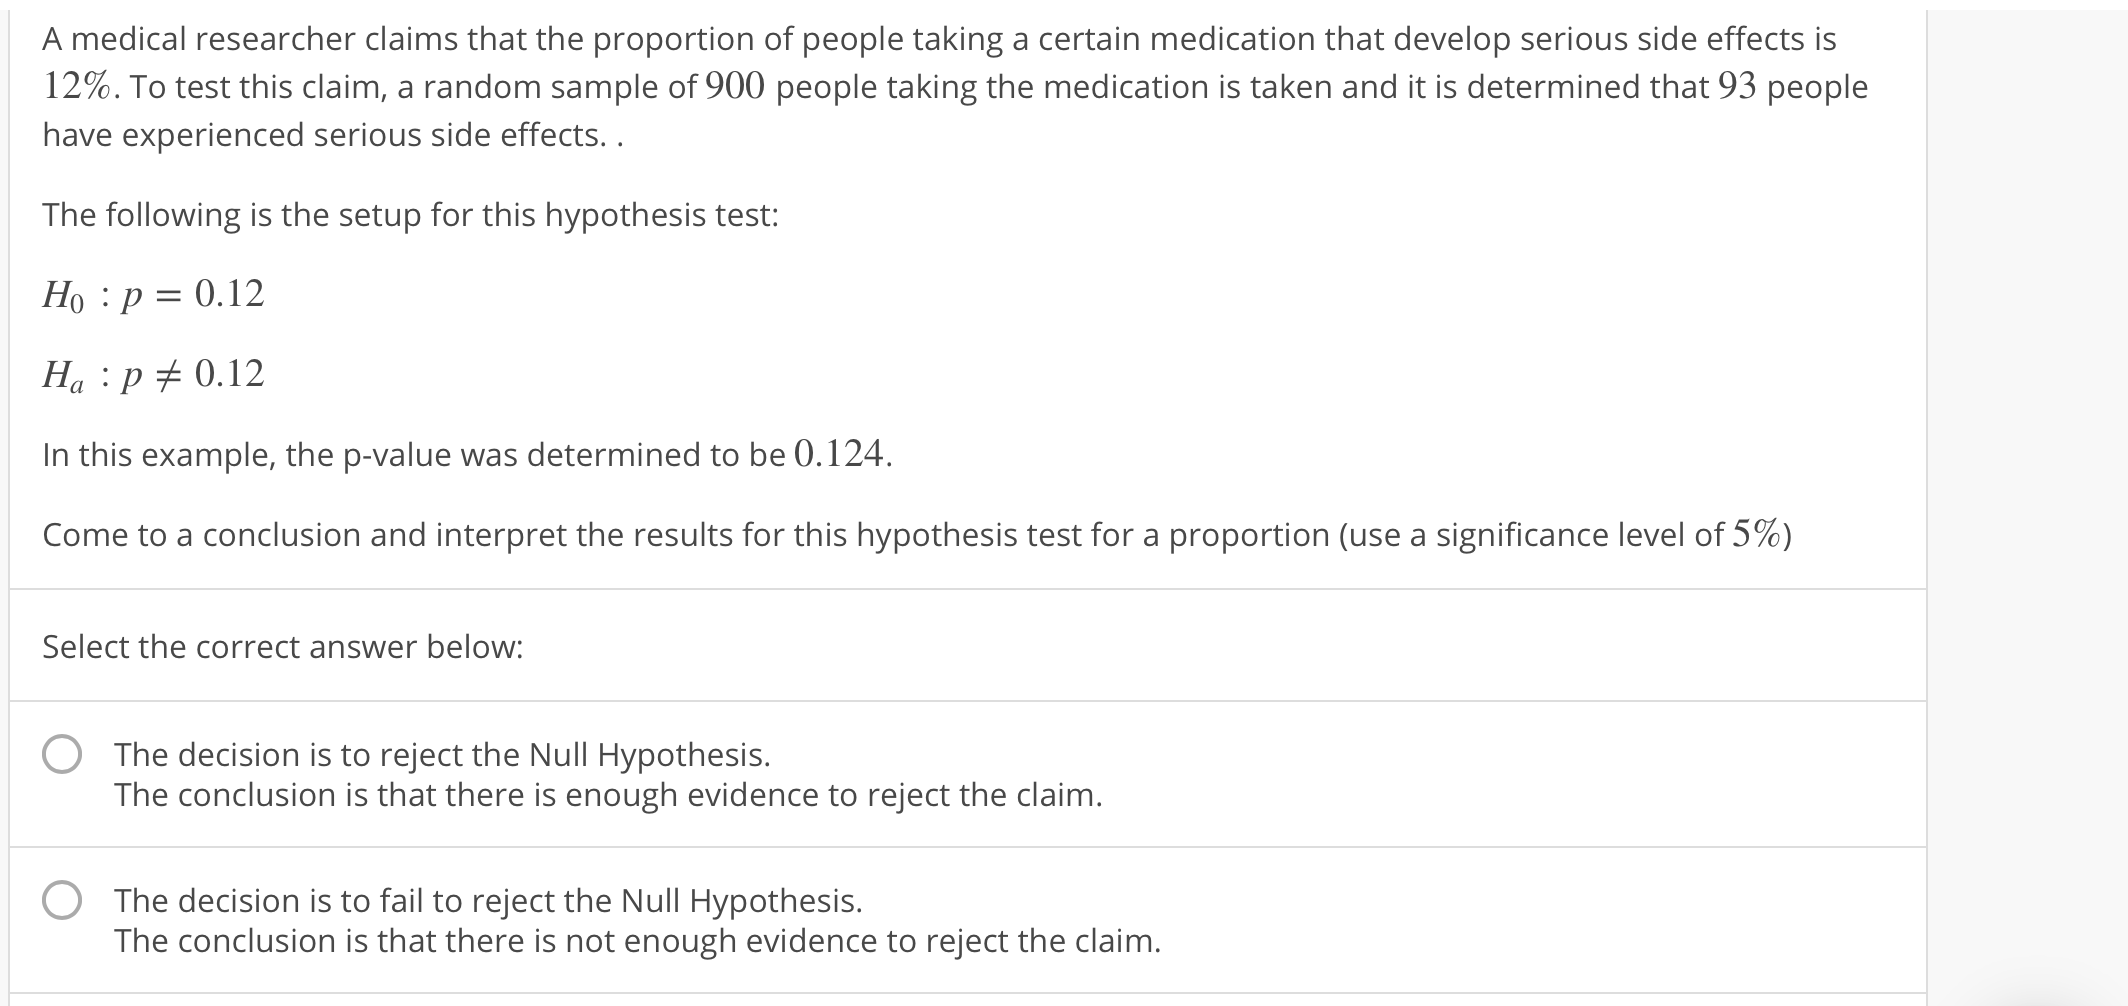 A medical researcher claims that the proportion of people taking a certain medication that develop serious side effects is
12%. To test this claim, a random sample of 900 people taking the medication is taken and it is determined that 93 people
have experienced serious side effects..
The following is the setup for this hypothesis test:
Ho :p 0.12
Ha p 0.12
In this example, the p-value was determined to be 0.124.
come to a conclusion and interpret the results for this hypothesis test for a proportion (use a significance level of 5%)
Select the correct answer below:
The decision is to reject the Null Hypothesis.
The conclusion is that there is enough evidence to reject the claim
O
The decision is to fail to reject the Null Hypothesis.
The conclusion is that there is not enough evidence to reject the claim
